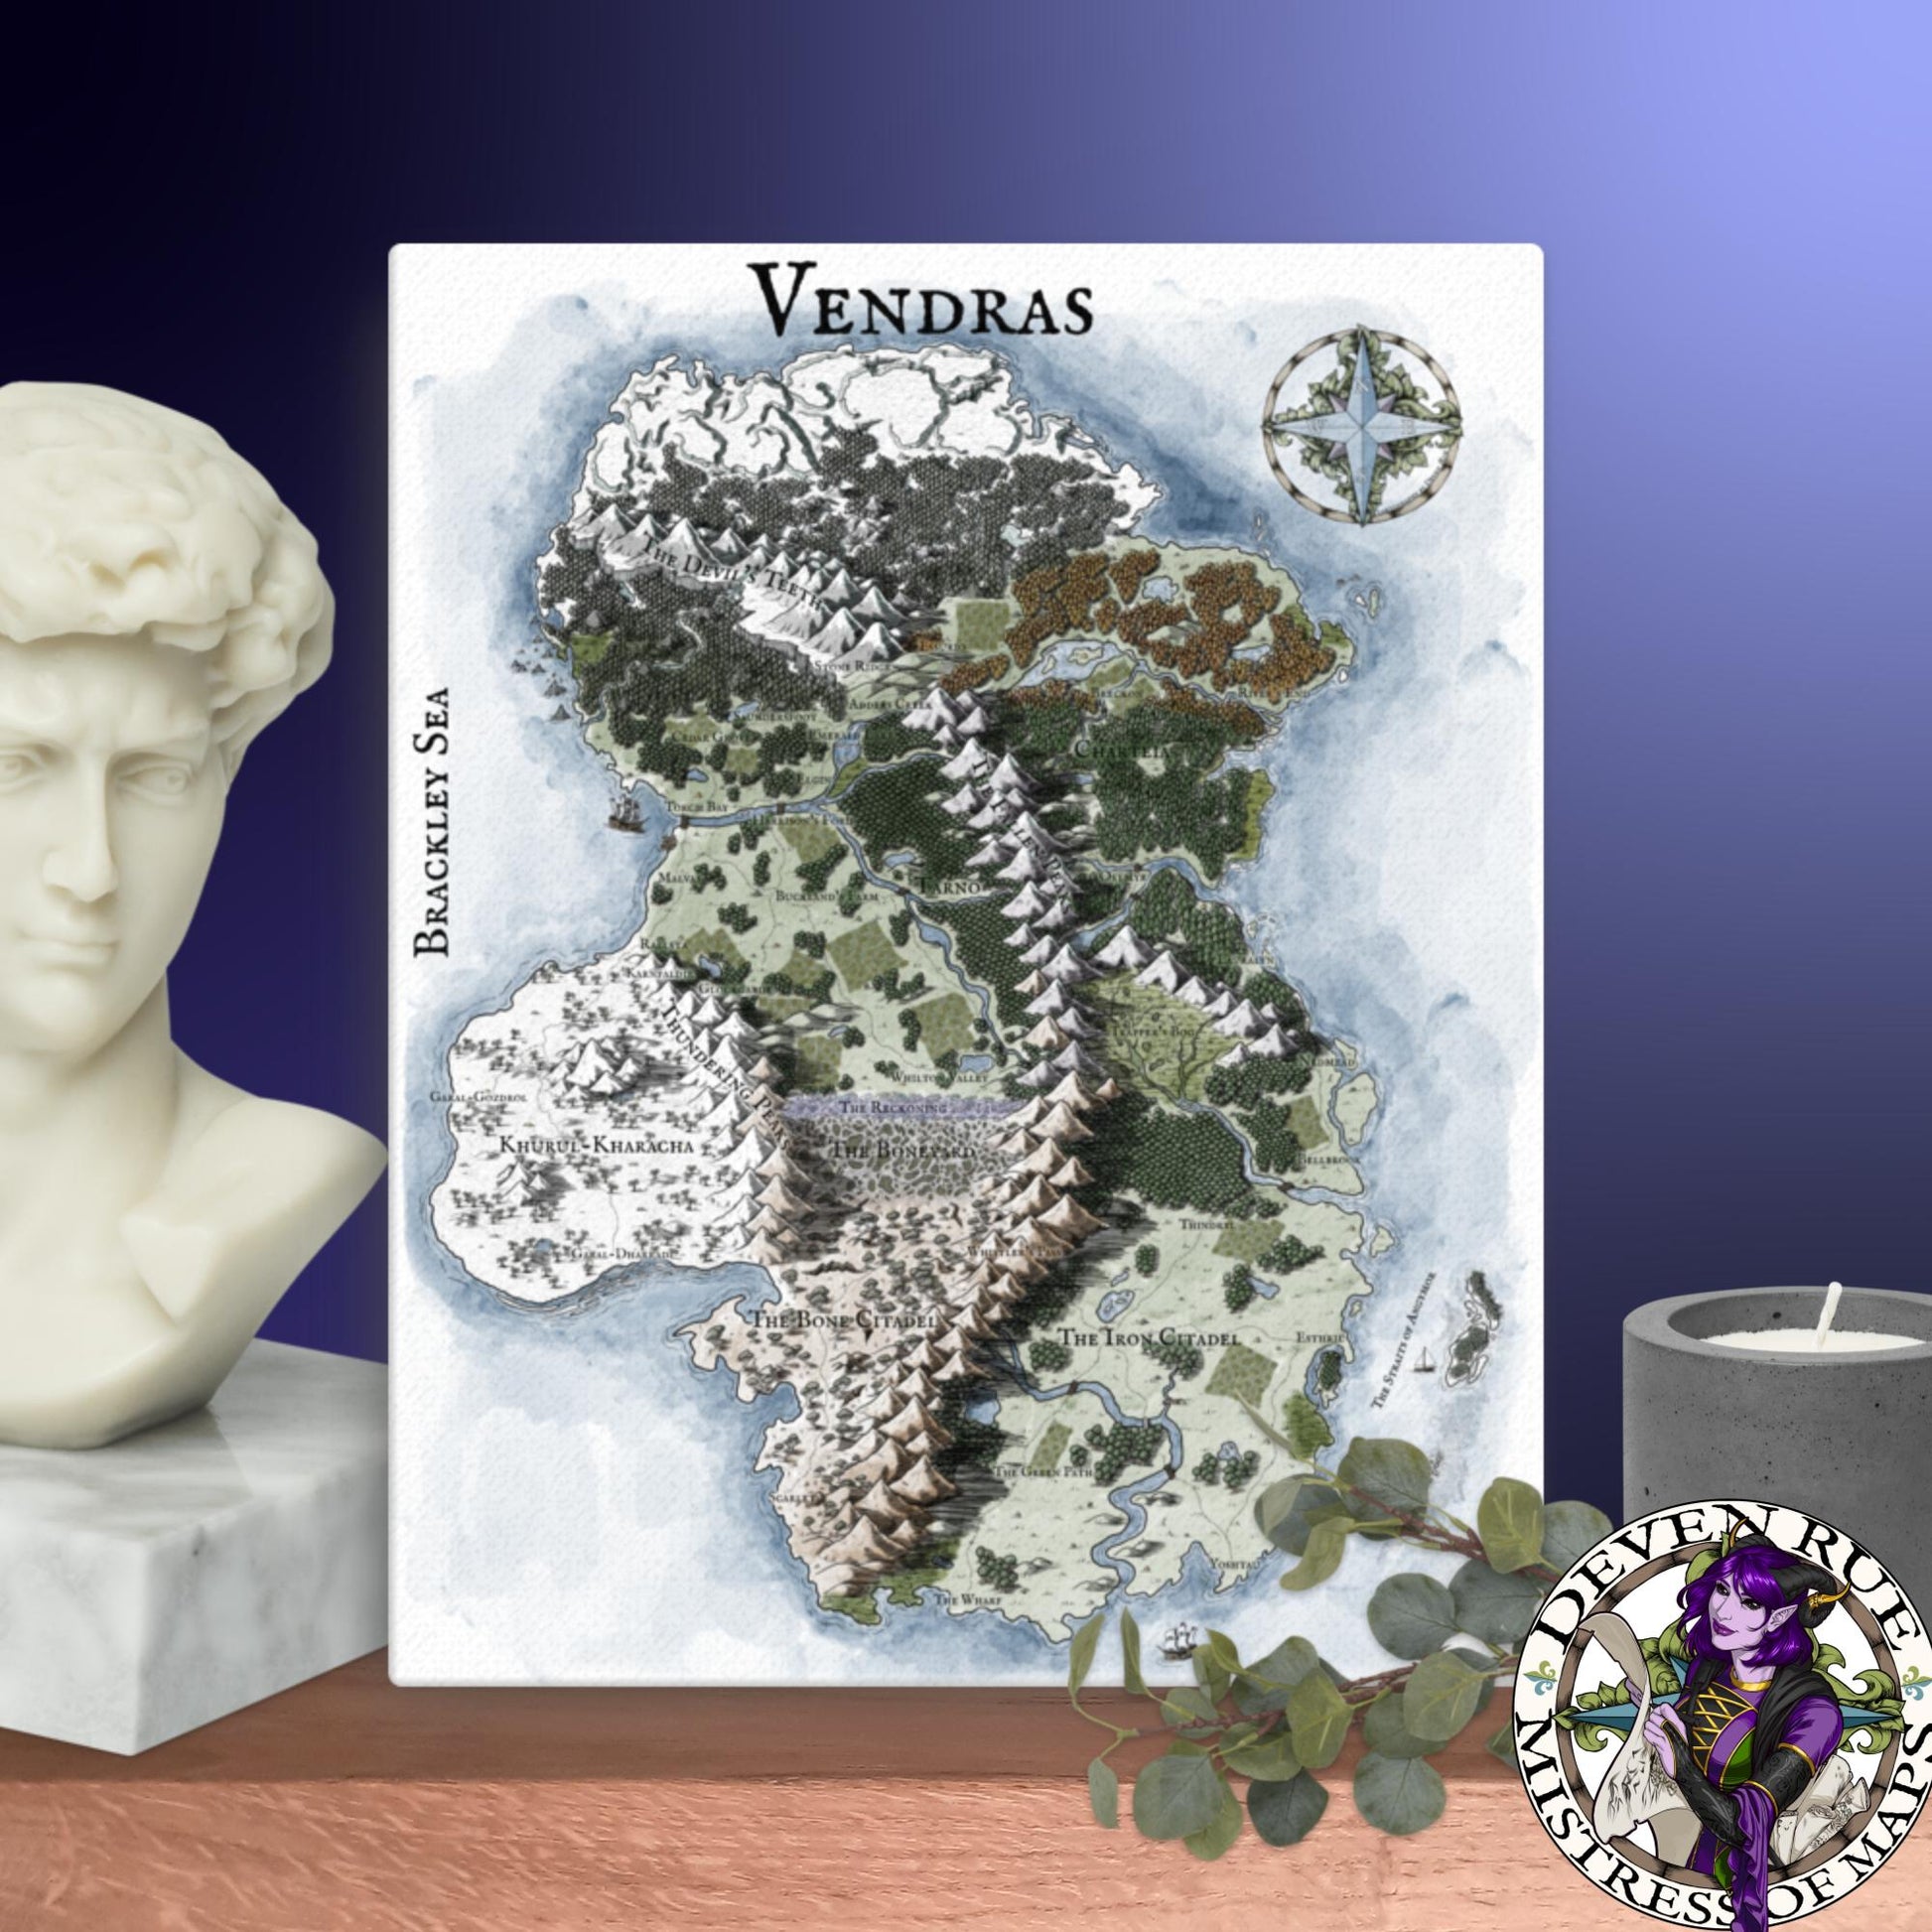 A 16" by 20" canvas print of the Vendras map by Deven Rue sits on a shelf with a stone bust, candle, and greenery.